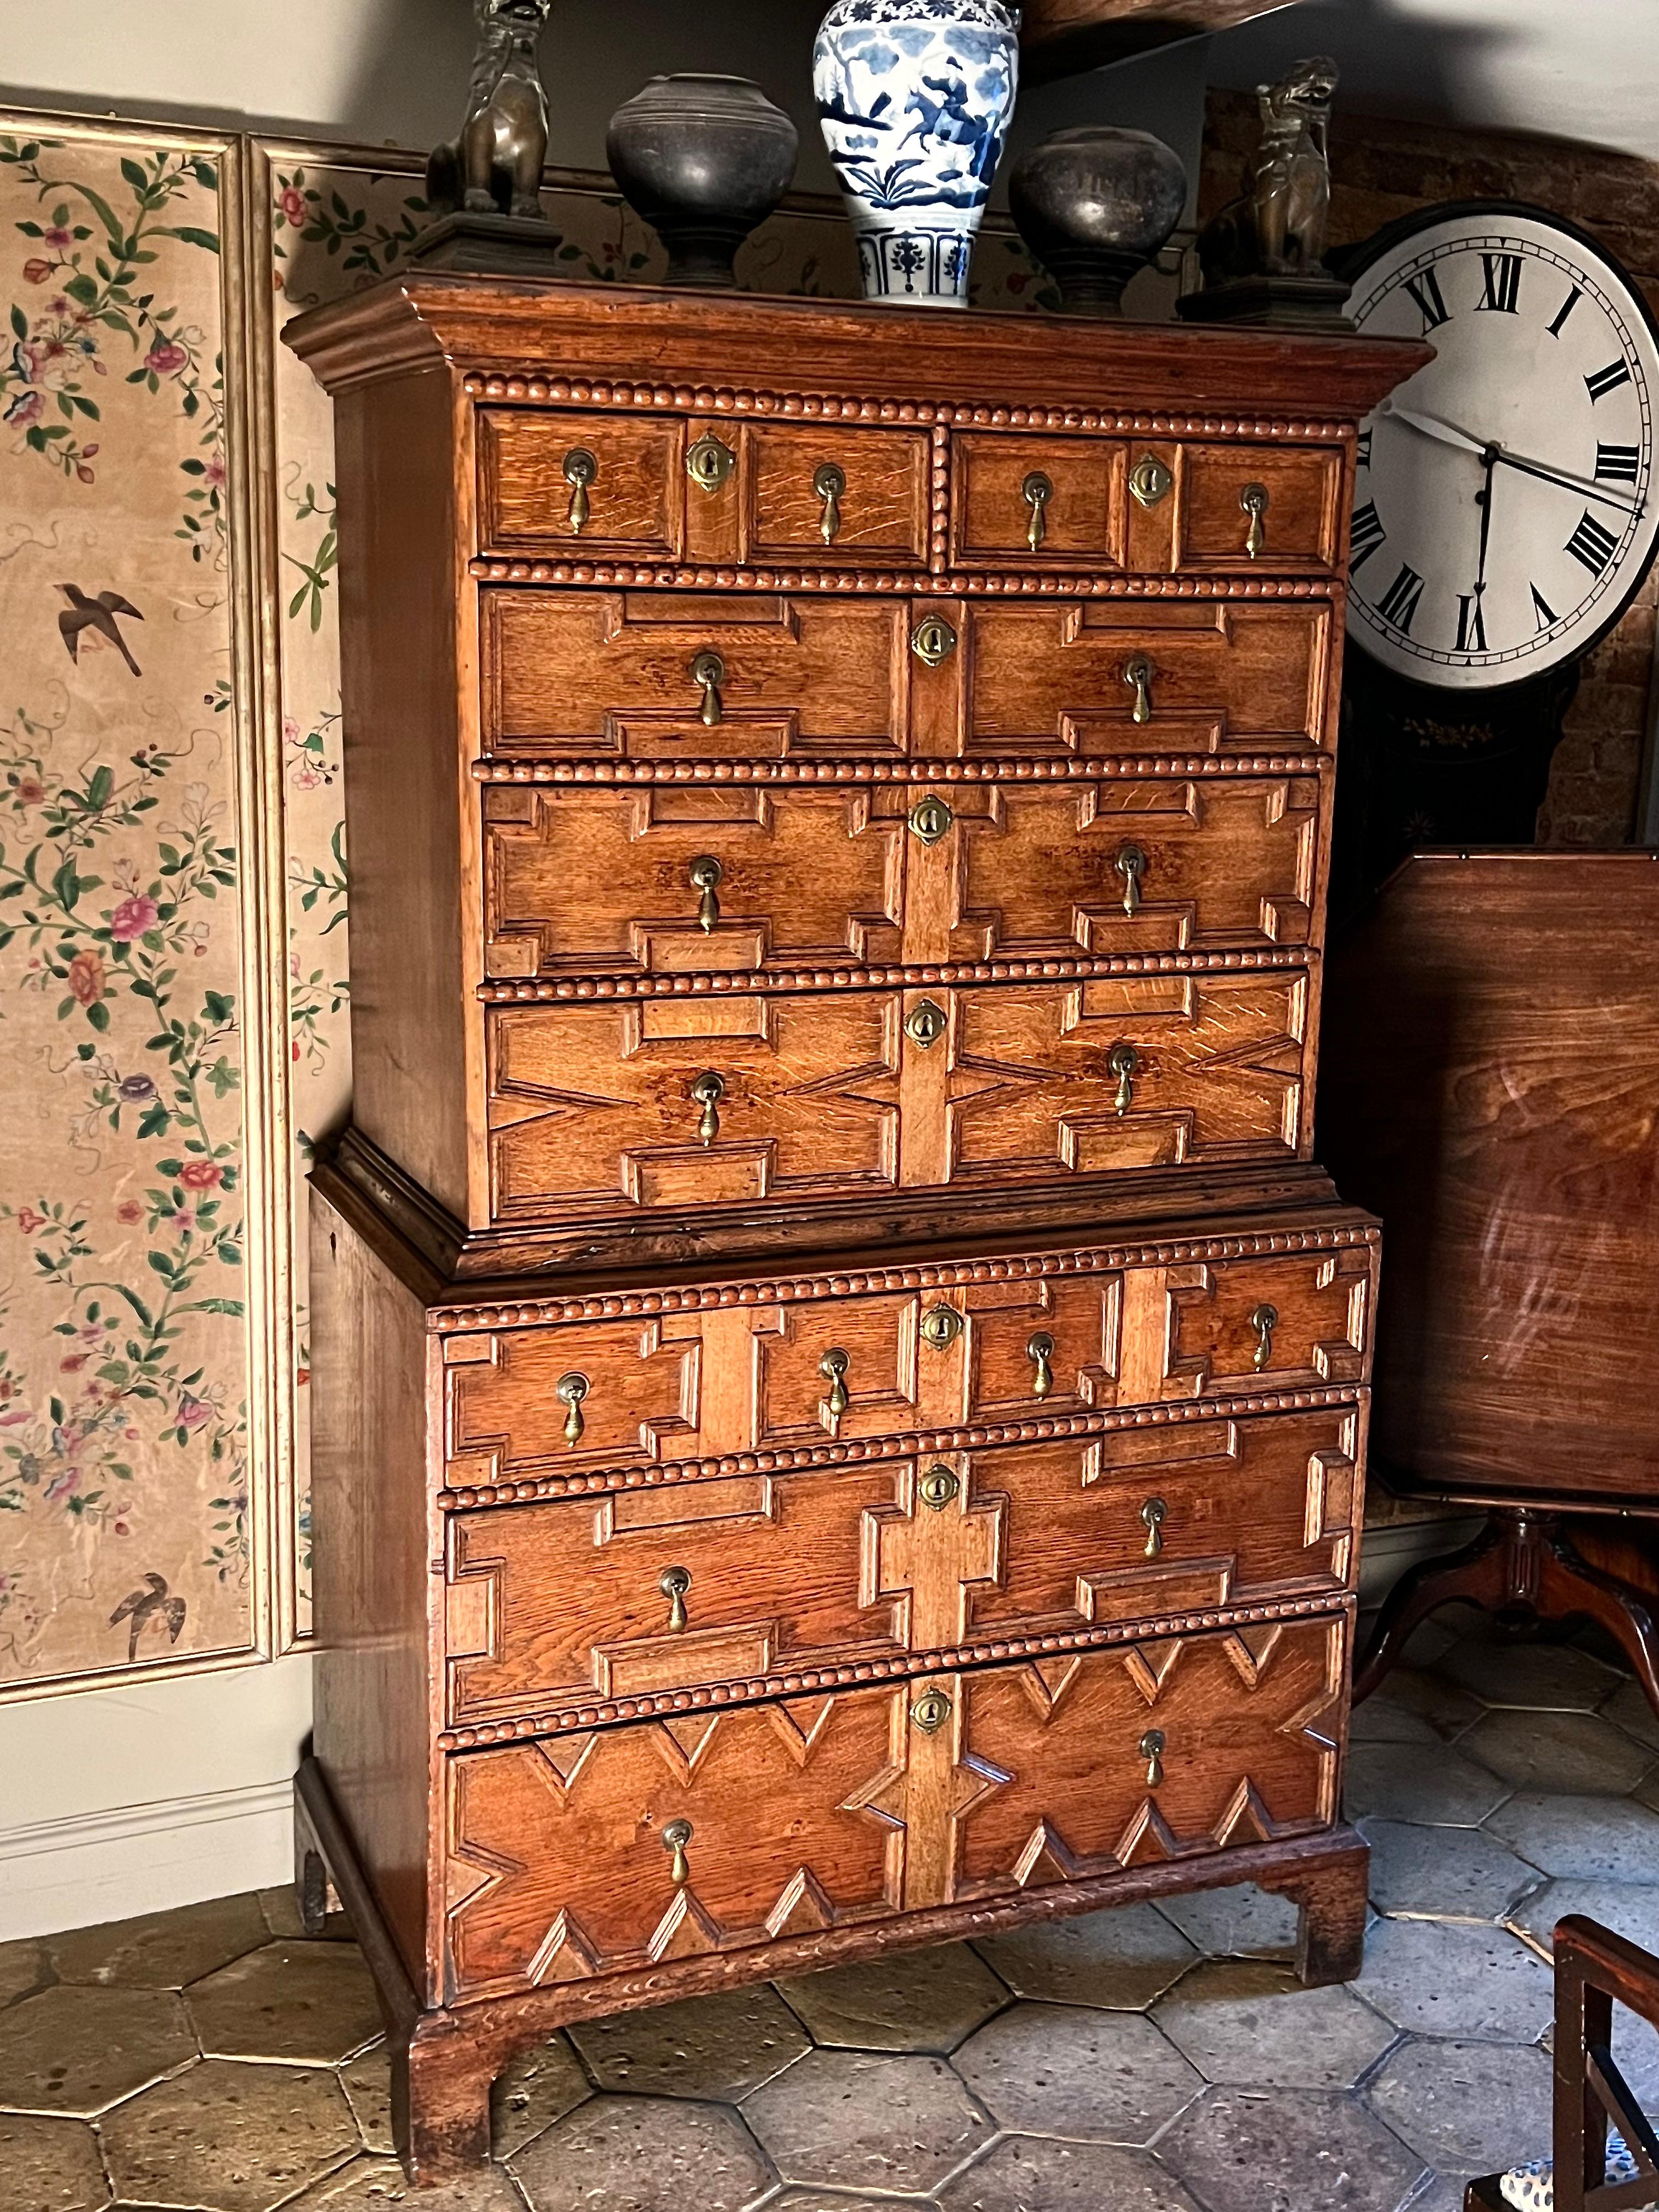 An English early-18th century oak geometrically-panelled chest on chest ca 1710-1720. Queen Anne / George I period.

NB. This is an interesting example of a transition from the late 17th century into the early part of the 18th century. Very often